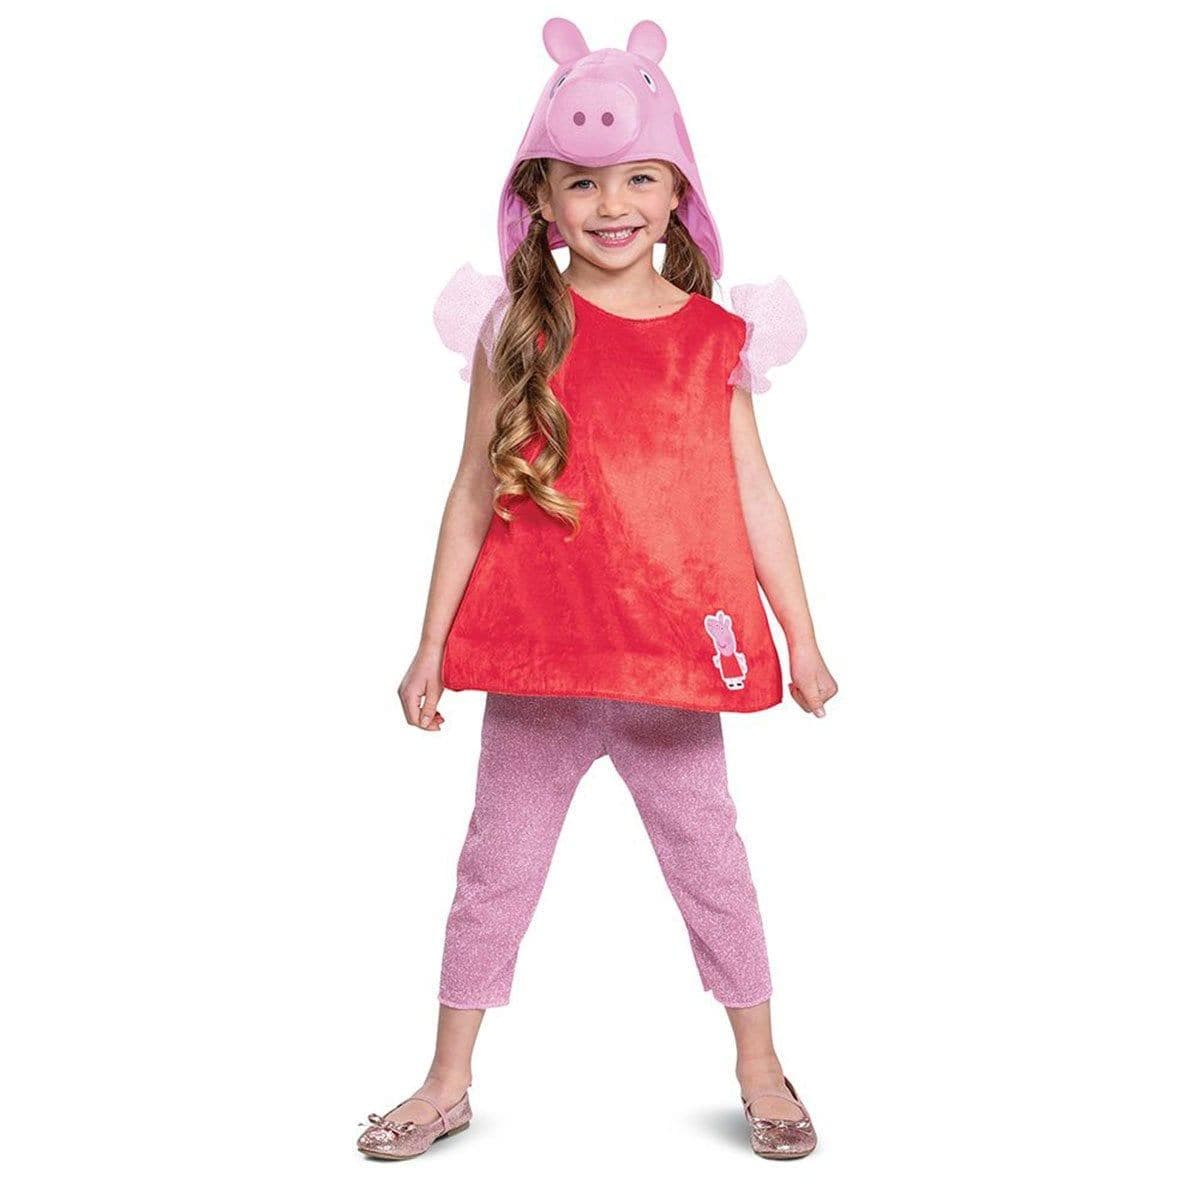 Buy Costumes Peppa Pig Classic Costume for Toddlers, Peppa Pig sold at Party Expert